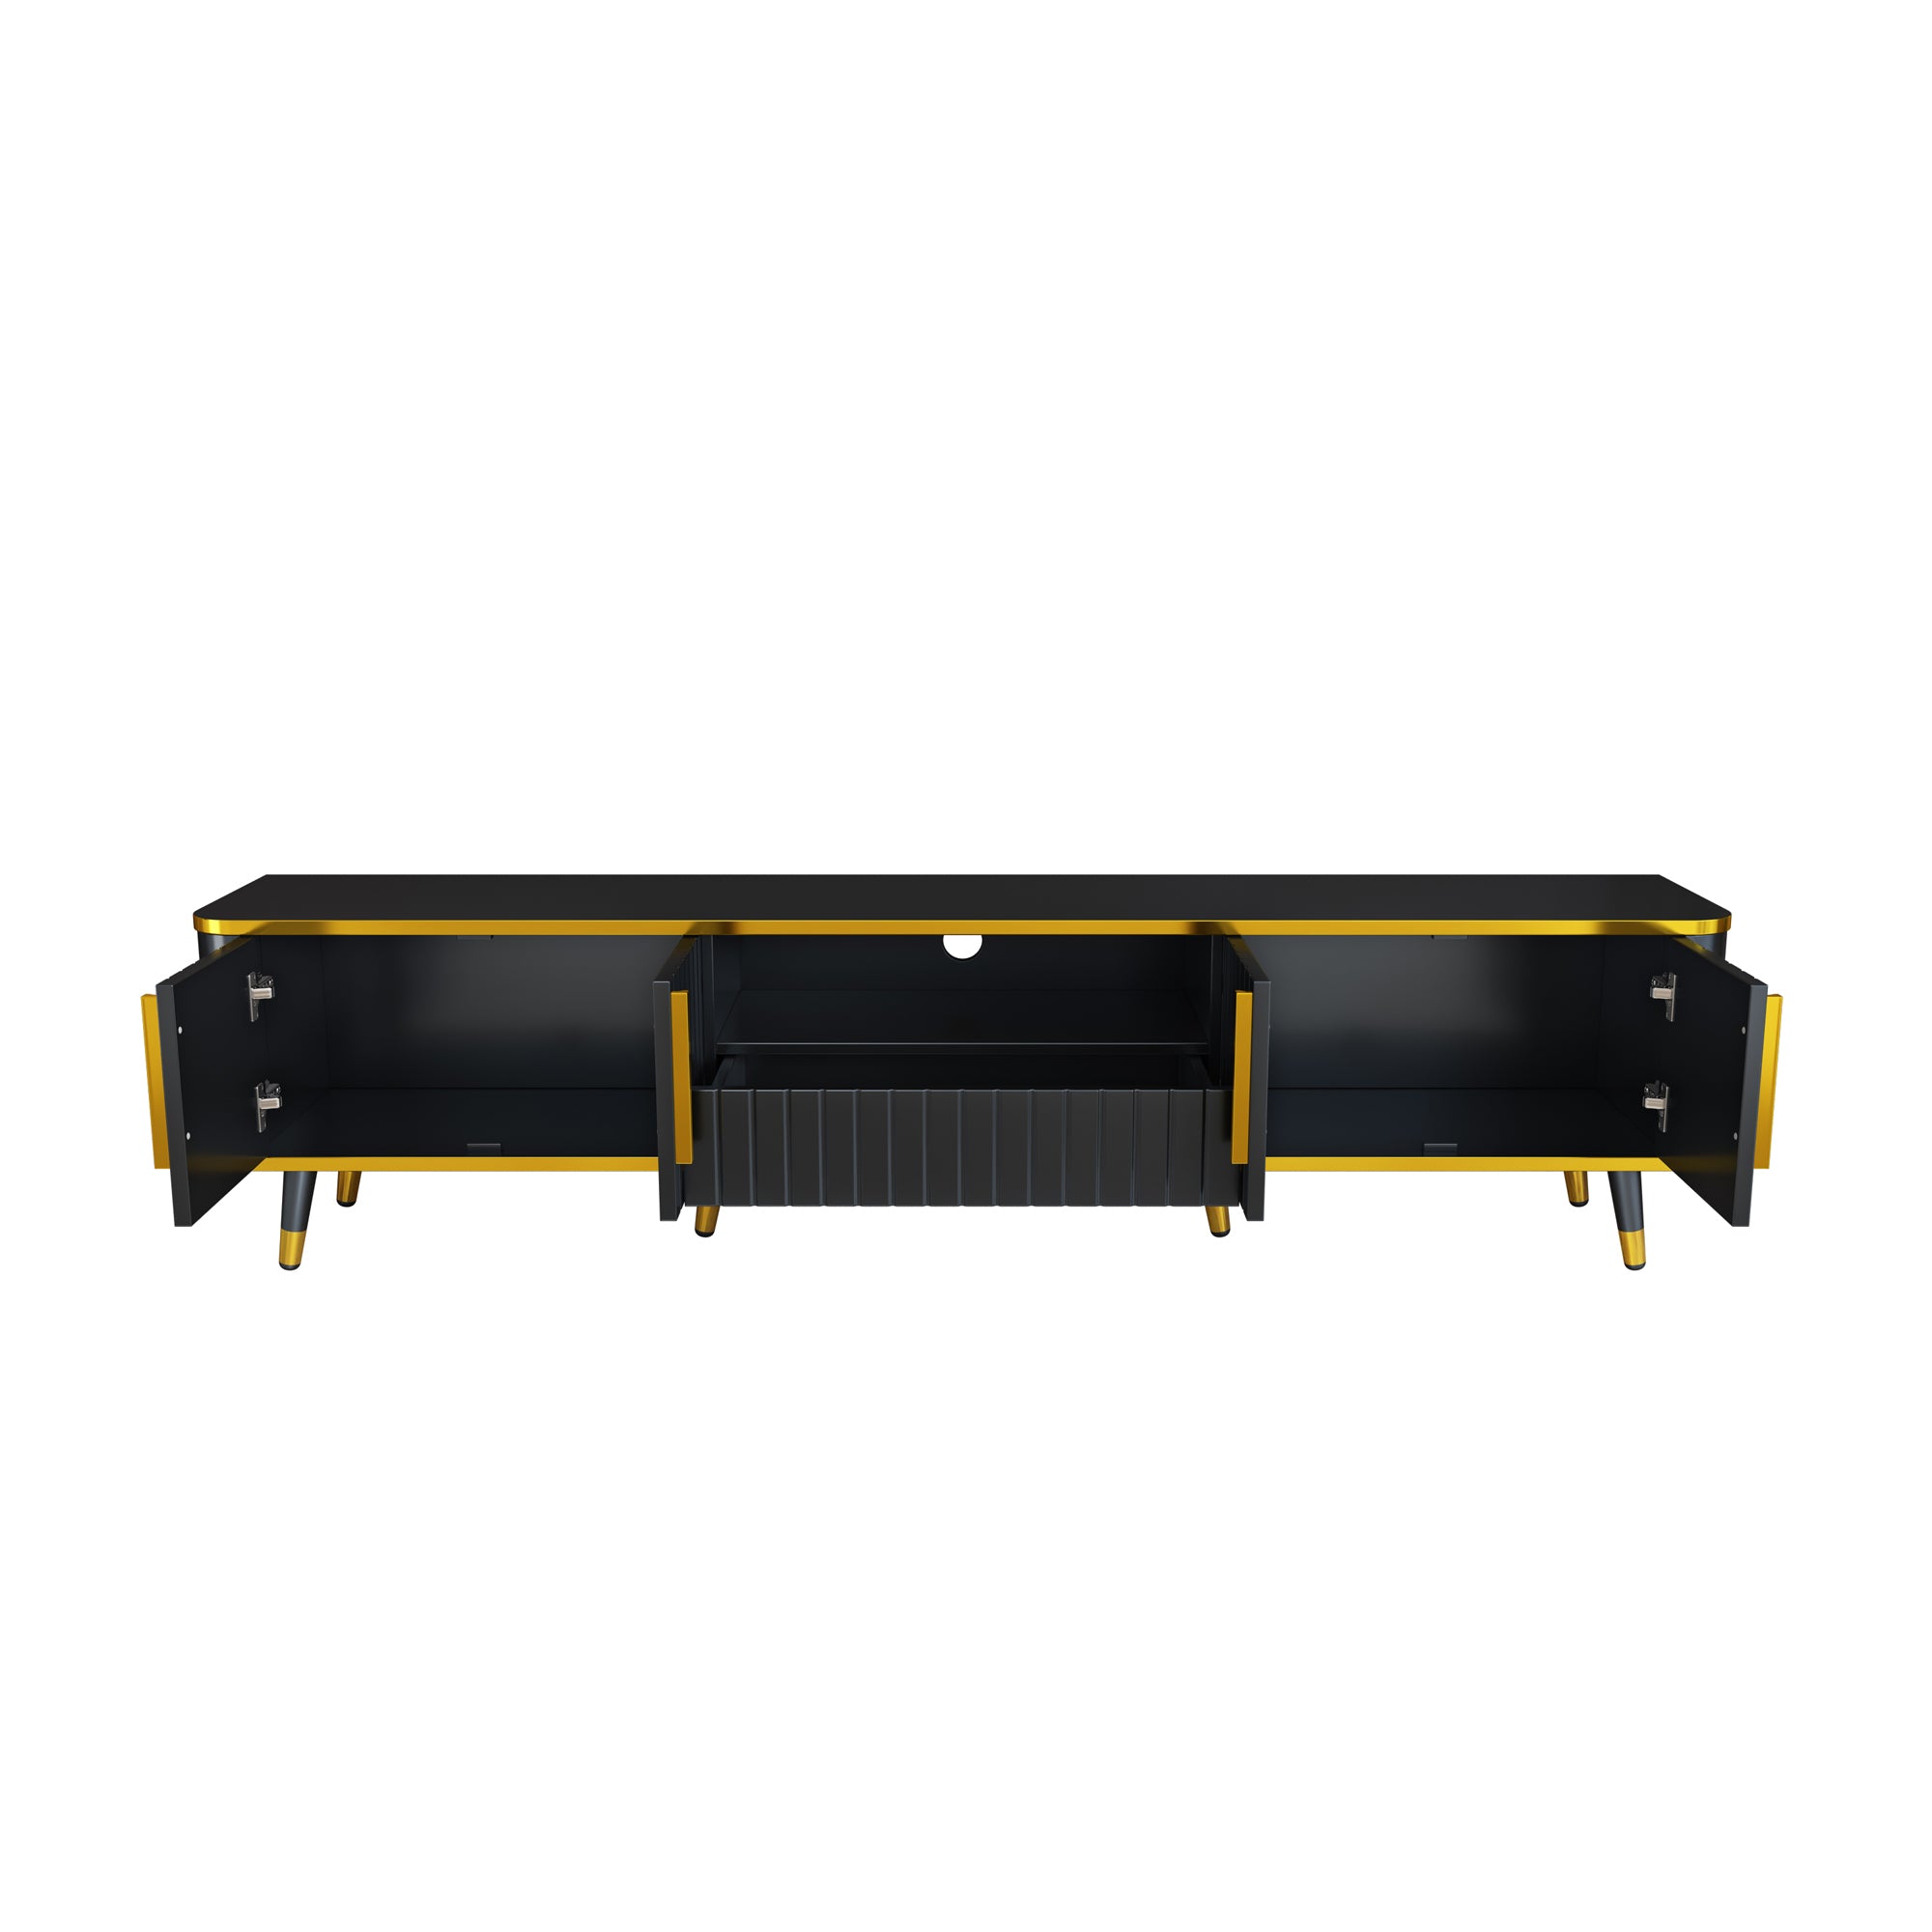 ON TREND Luxury Minimalism TV Stand with Open Storage gold+black-primary living space-80-89